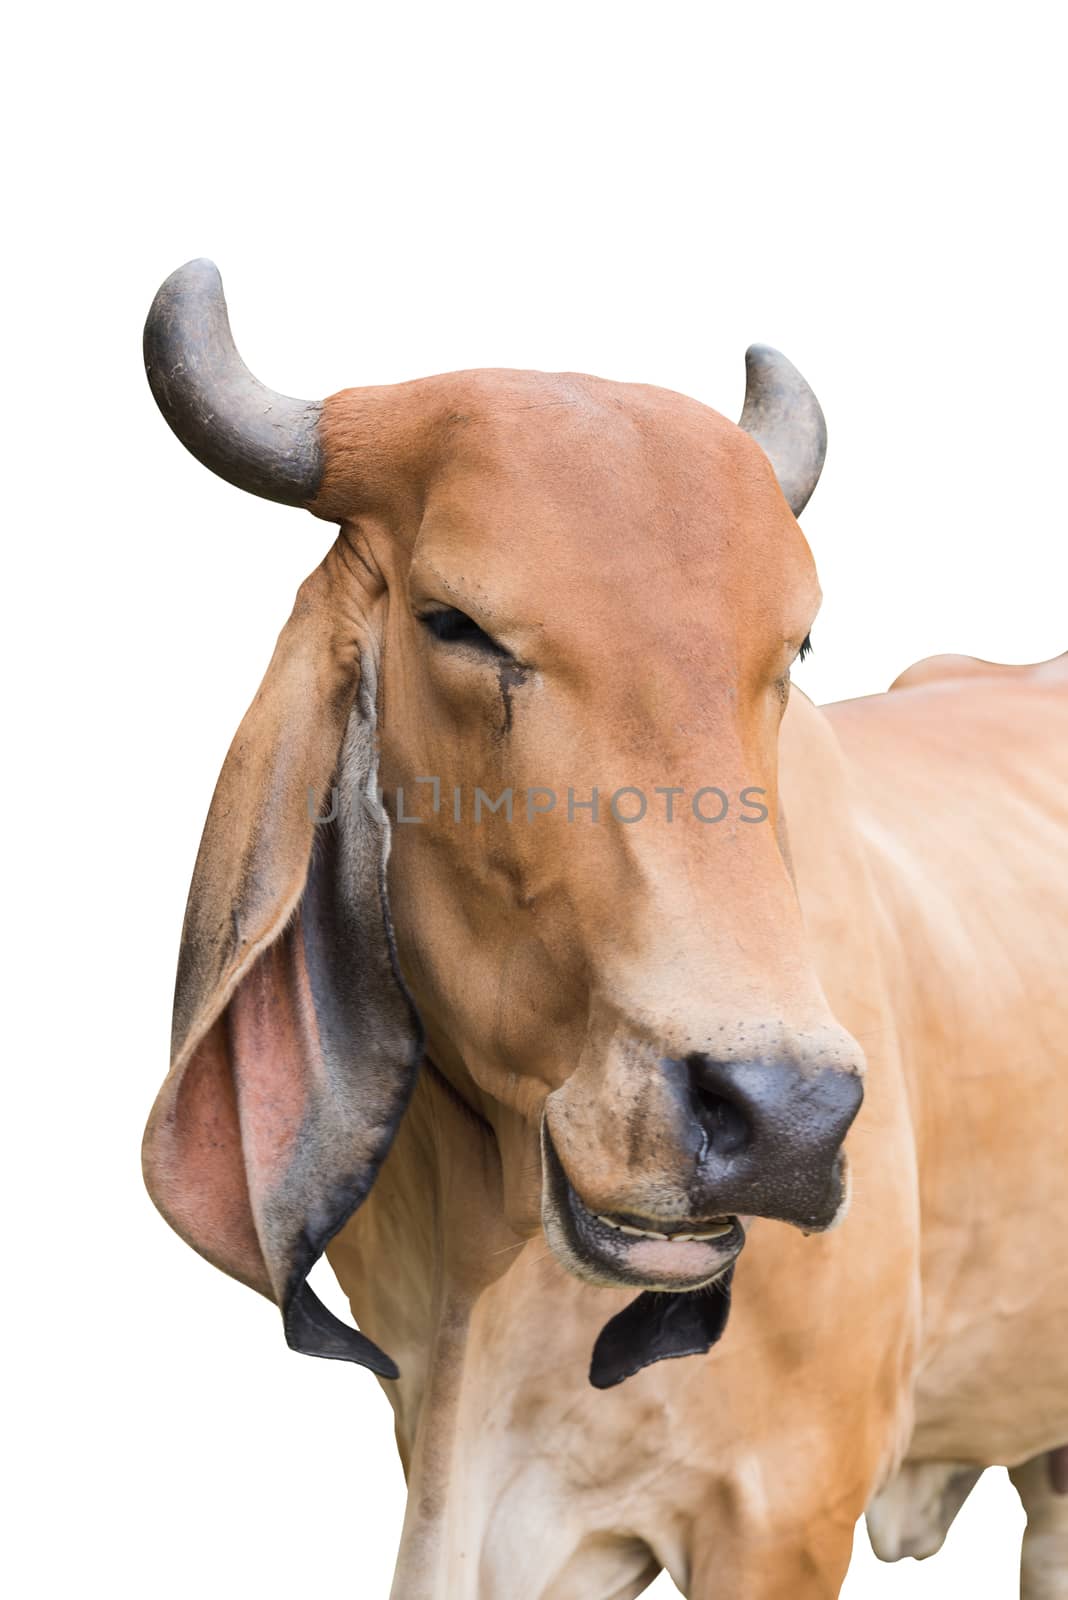 Asia old cow smile isolate on white background